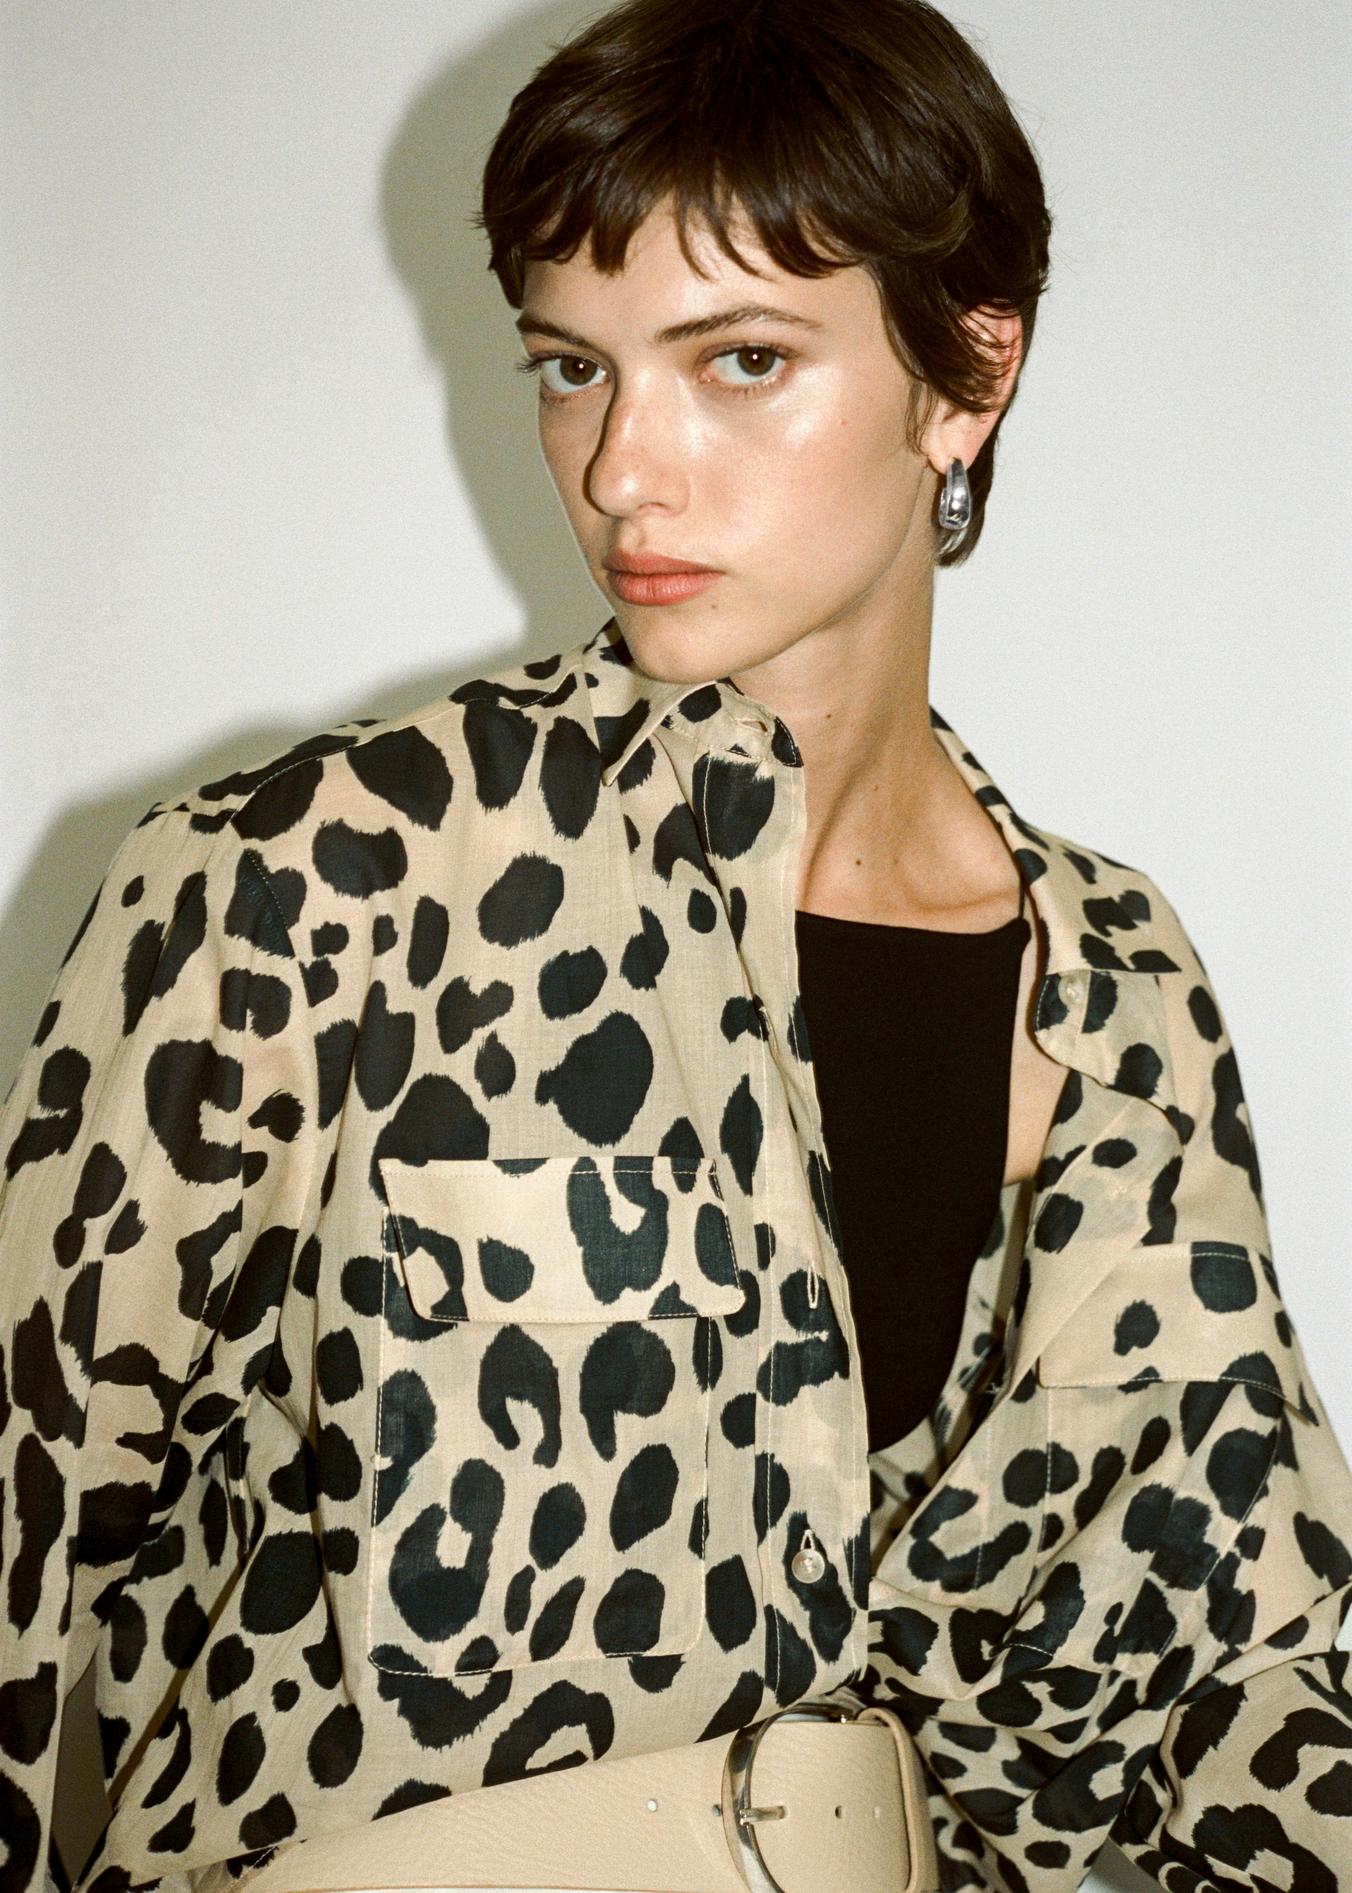 Animal print shirt offers at R 1299 in Mango